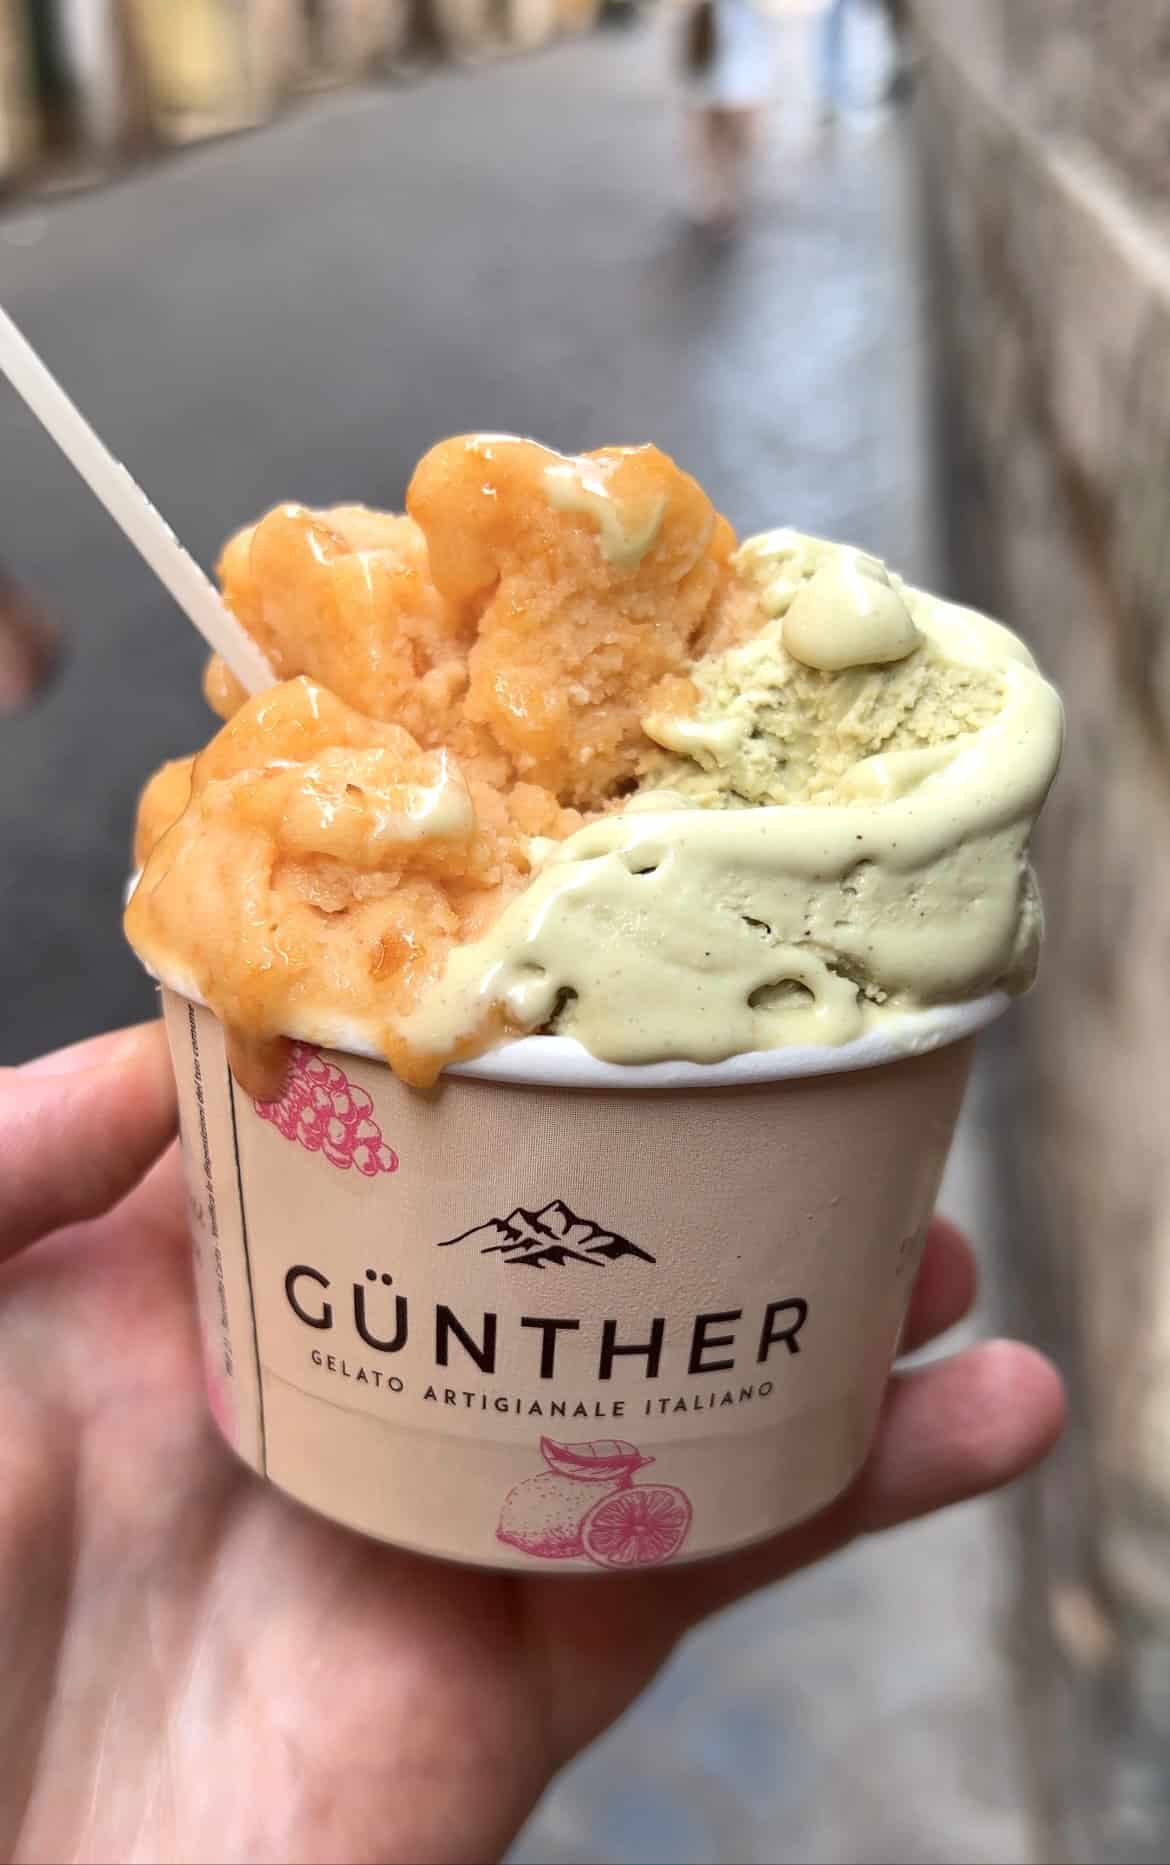 An image of a hand holding a cup of gelato from Günther gelato in Rome. The cobbled streets of Rome are in the background, and the melty pistachio and apricot gelato is in the foreground.